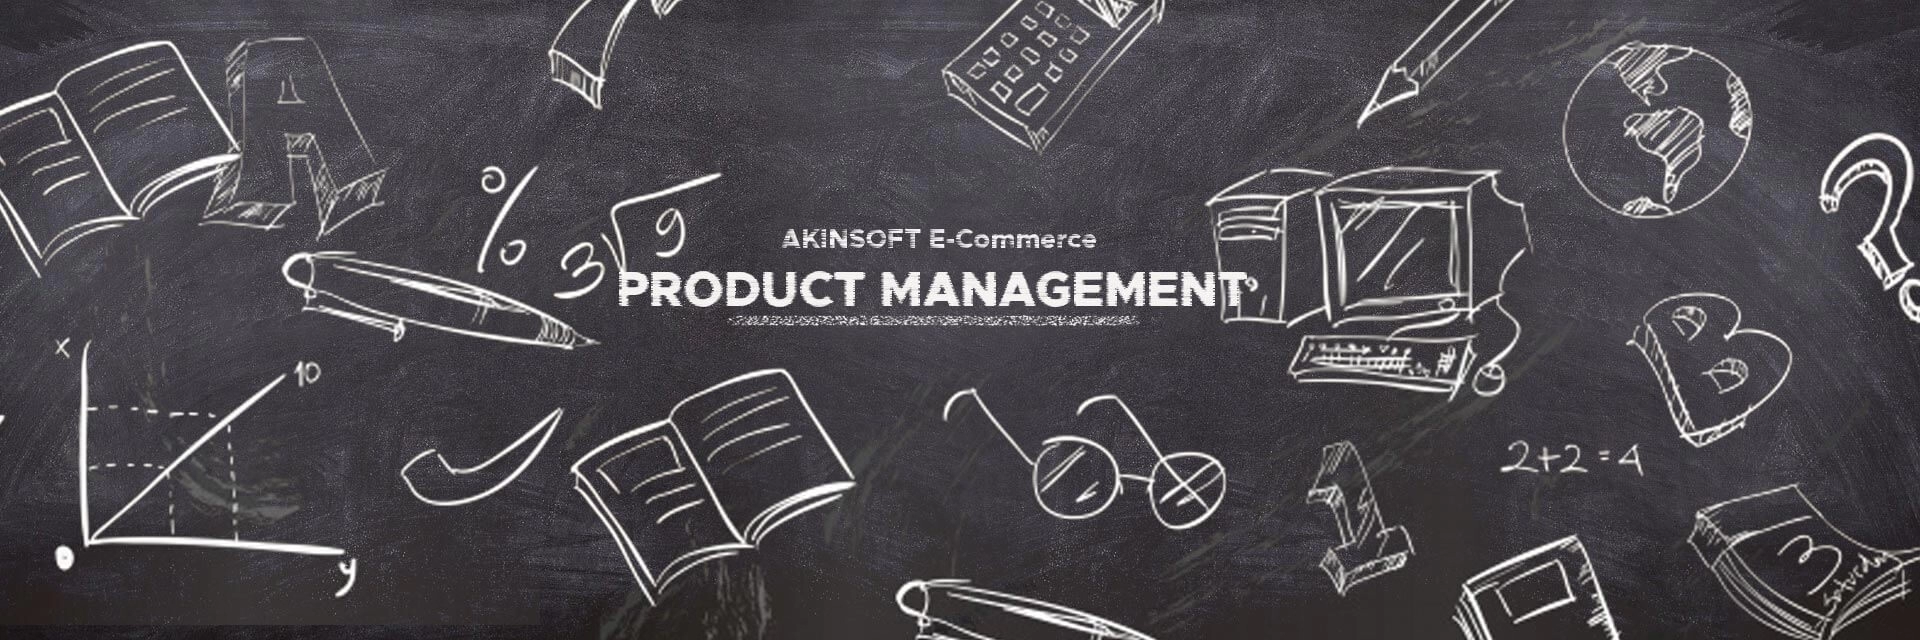 Products & Categories Management